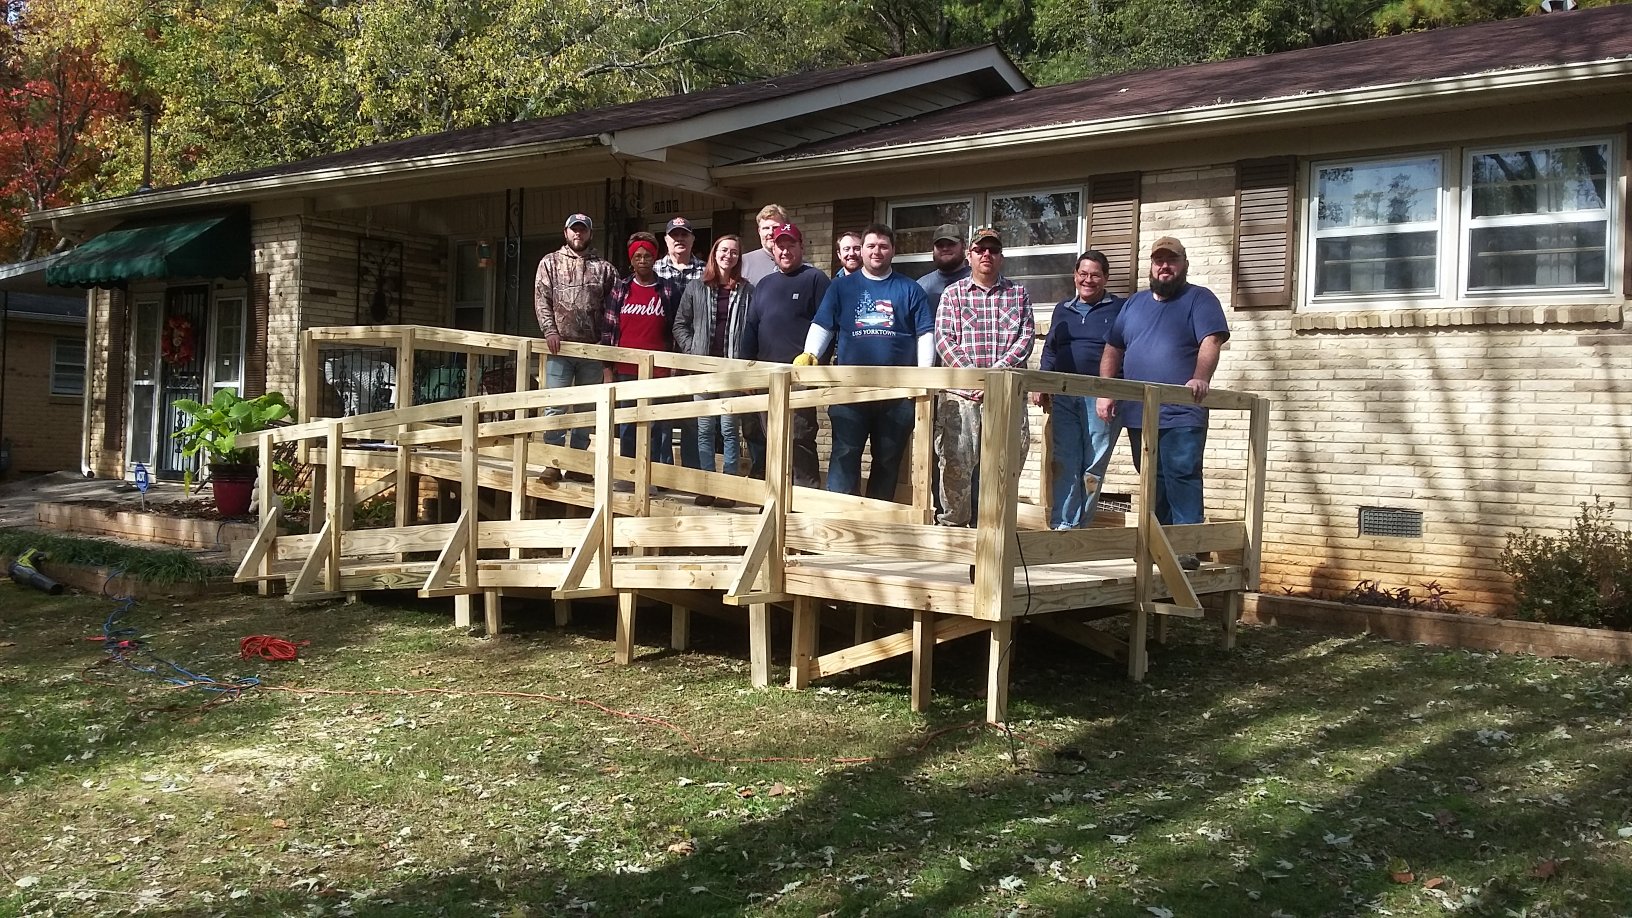 Team members complete a ramp as a project for the Care and Assurance System for the Aging and Homebound of Madison County.